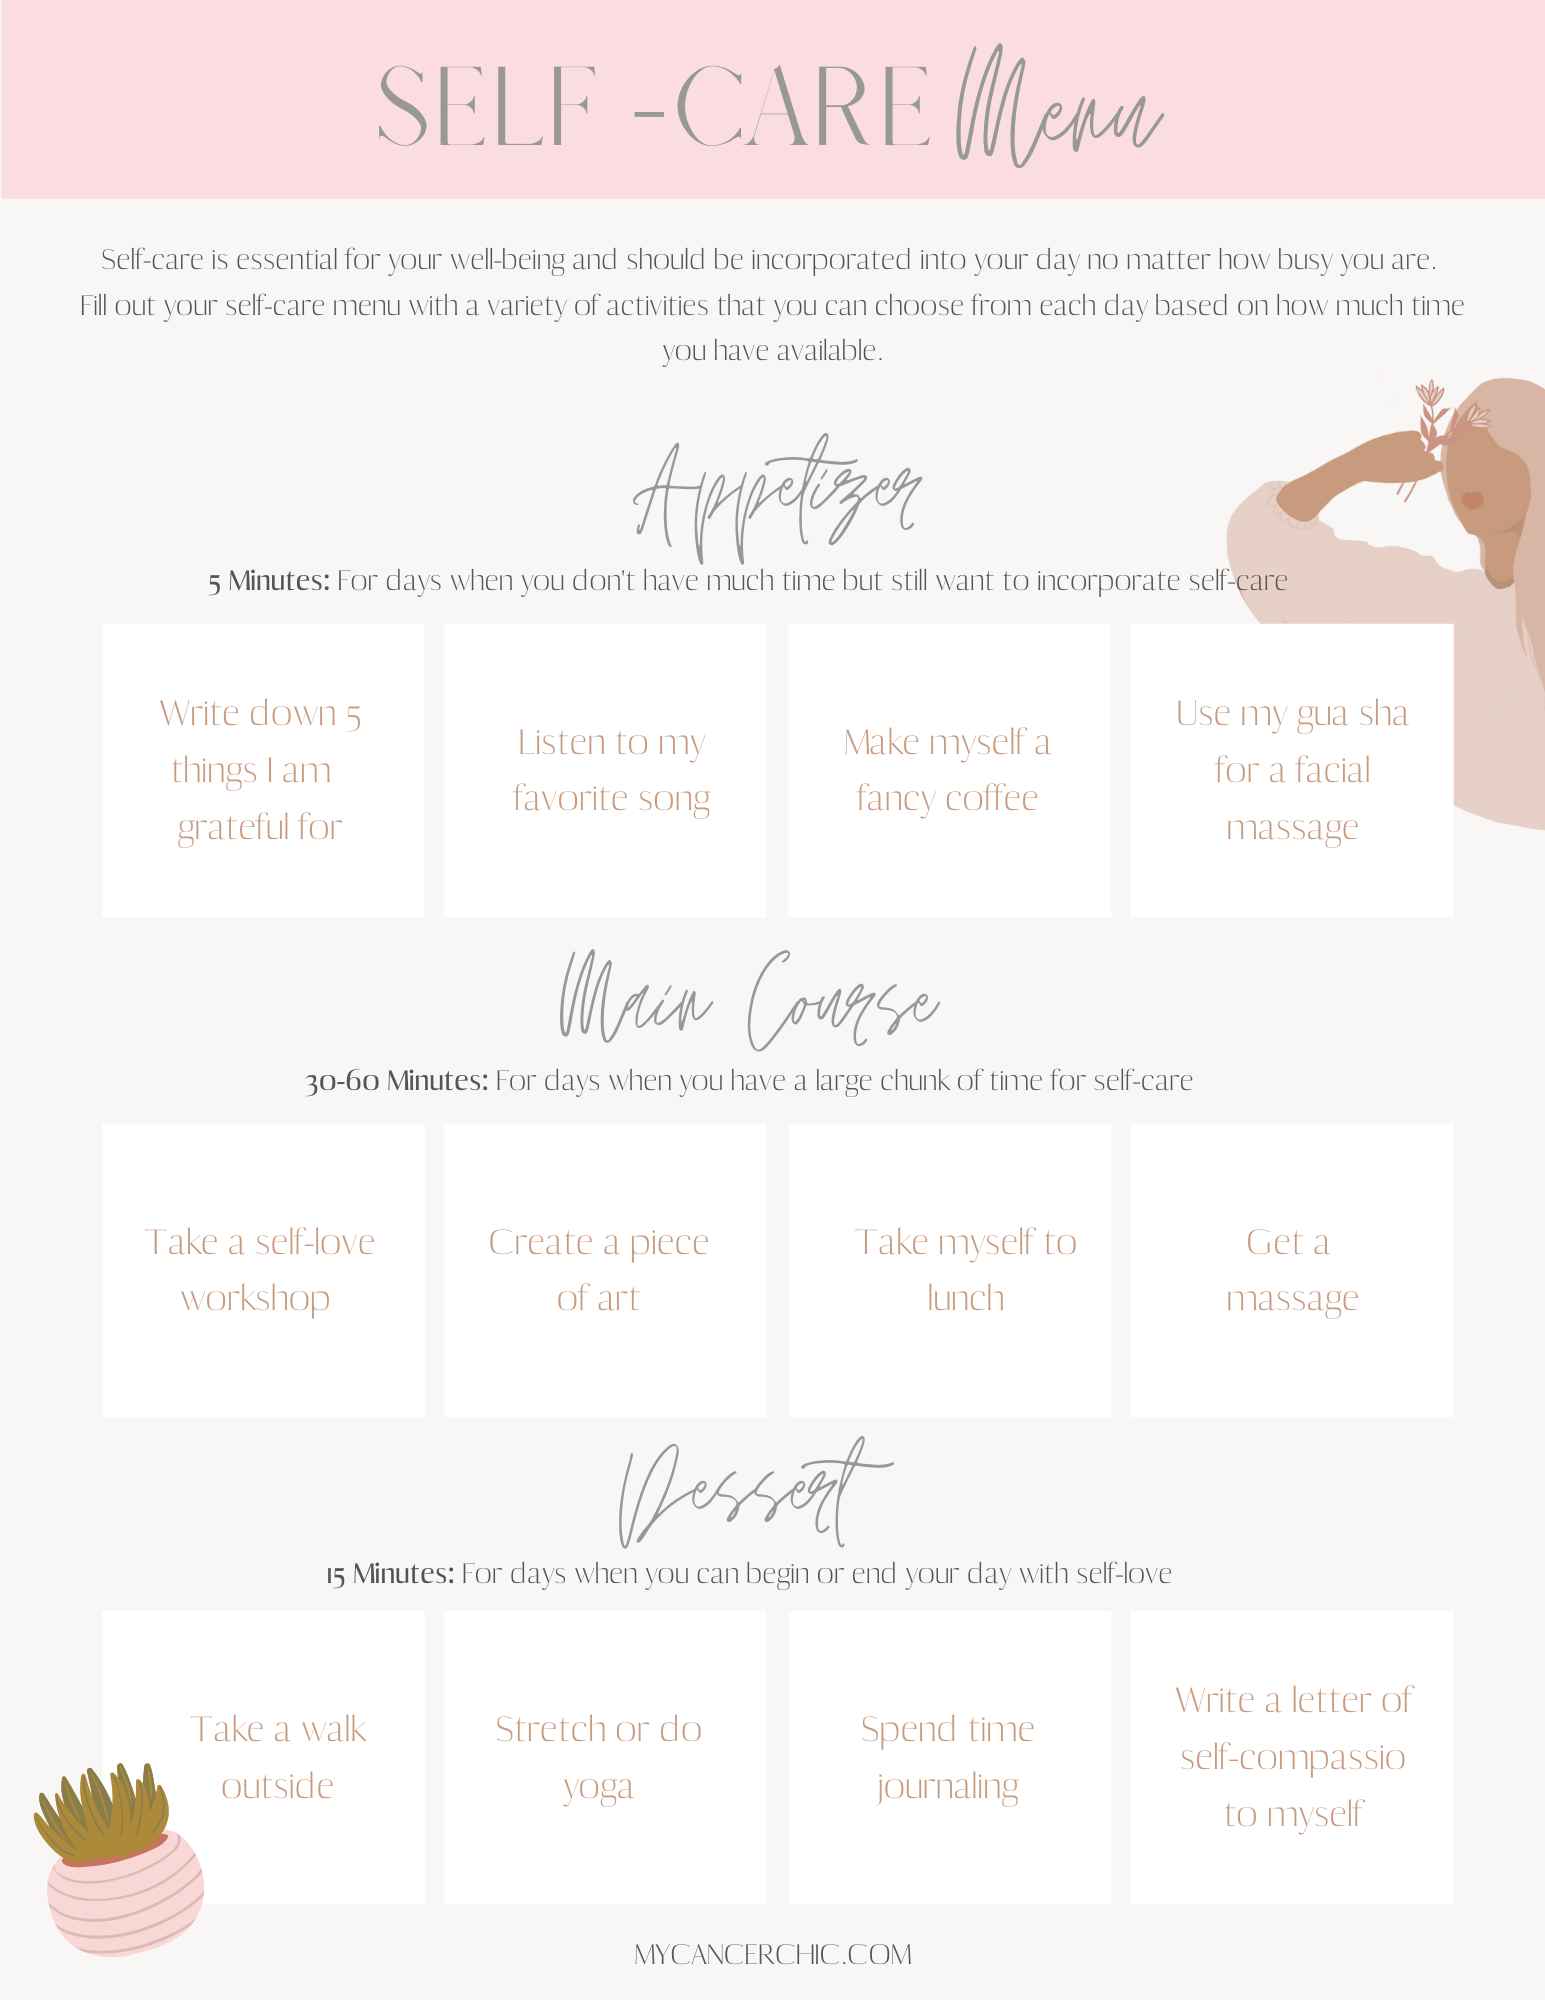 Self Care Menu with examples of activities